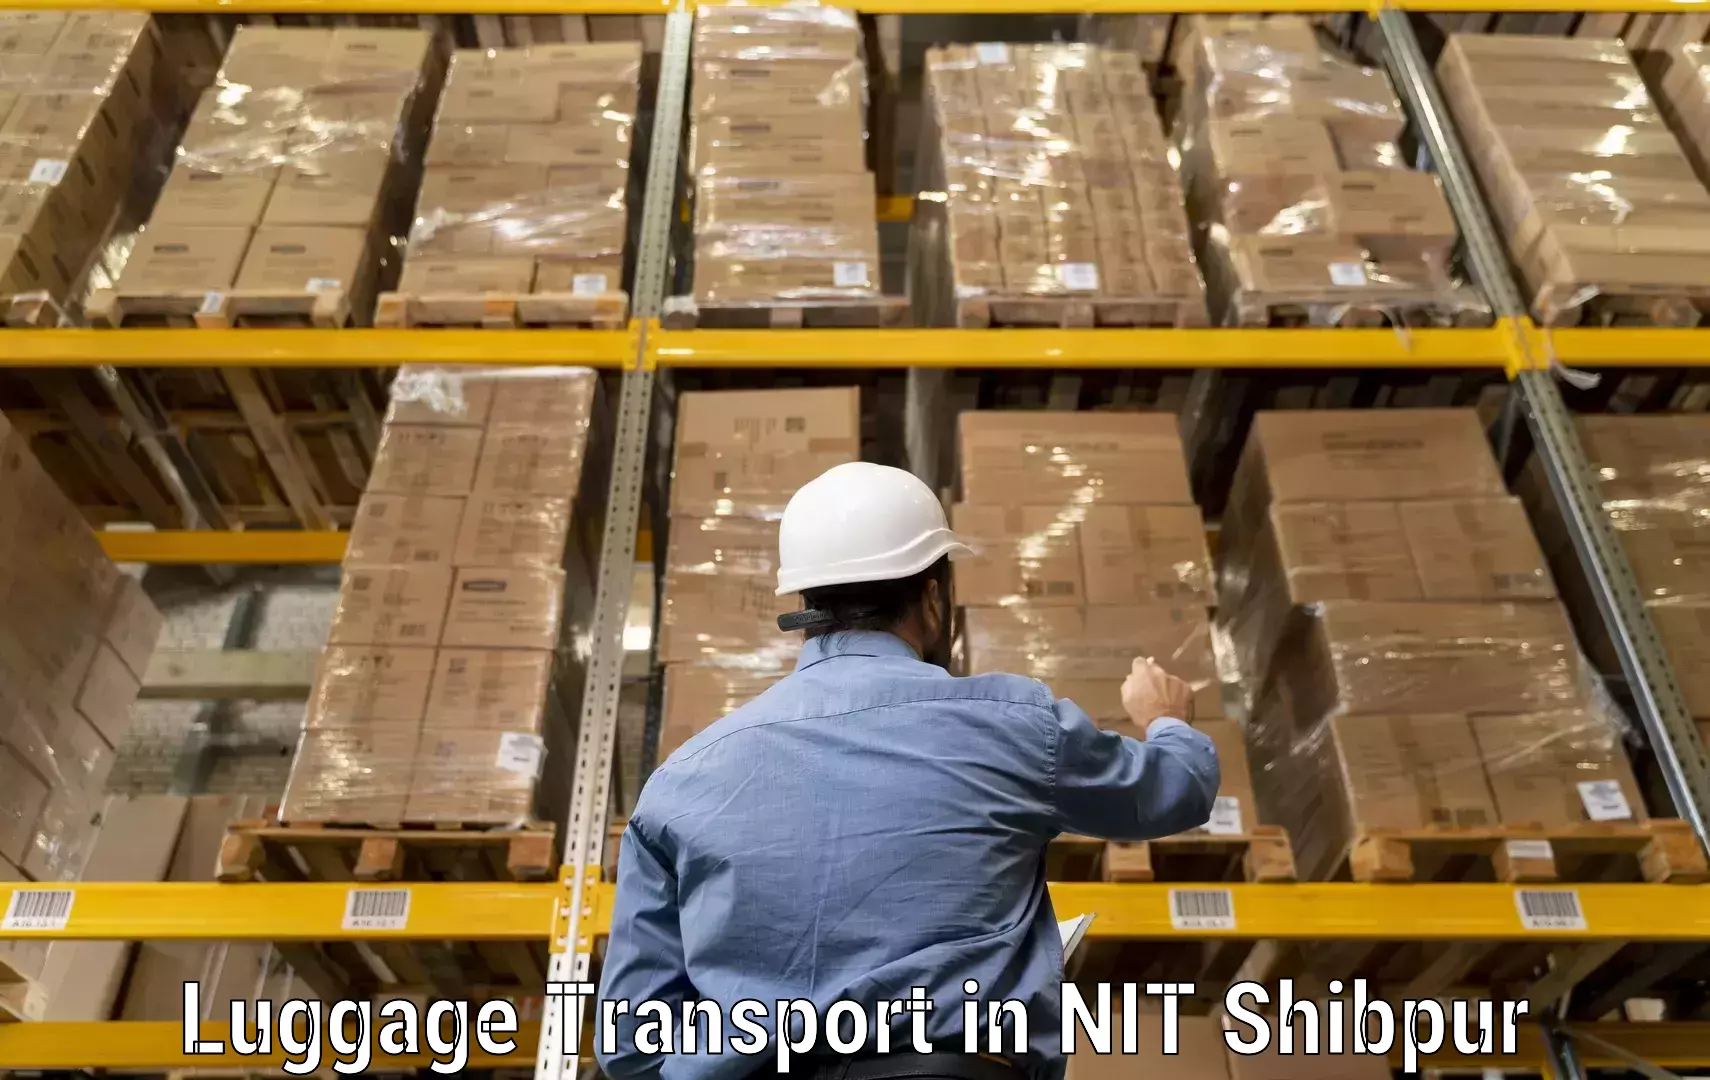 Discounted baggage transport in NIT Shibpur